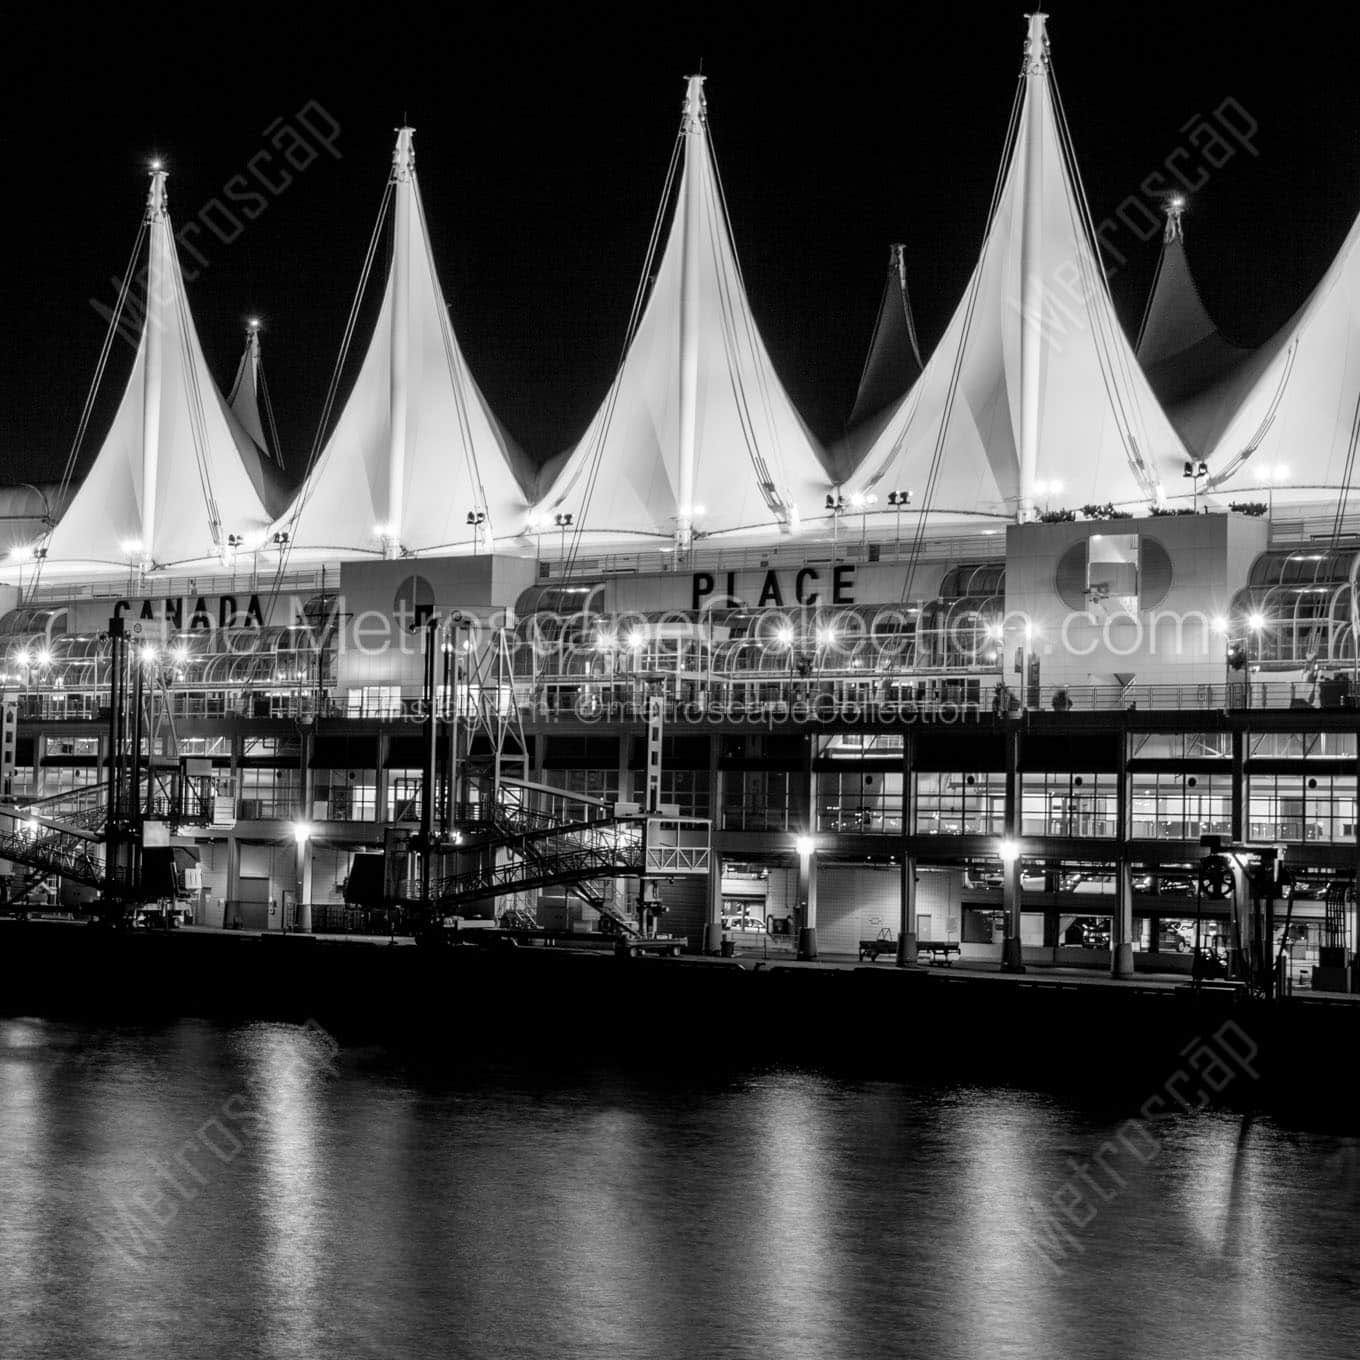 canada place at night Black & White Wall Art